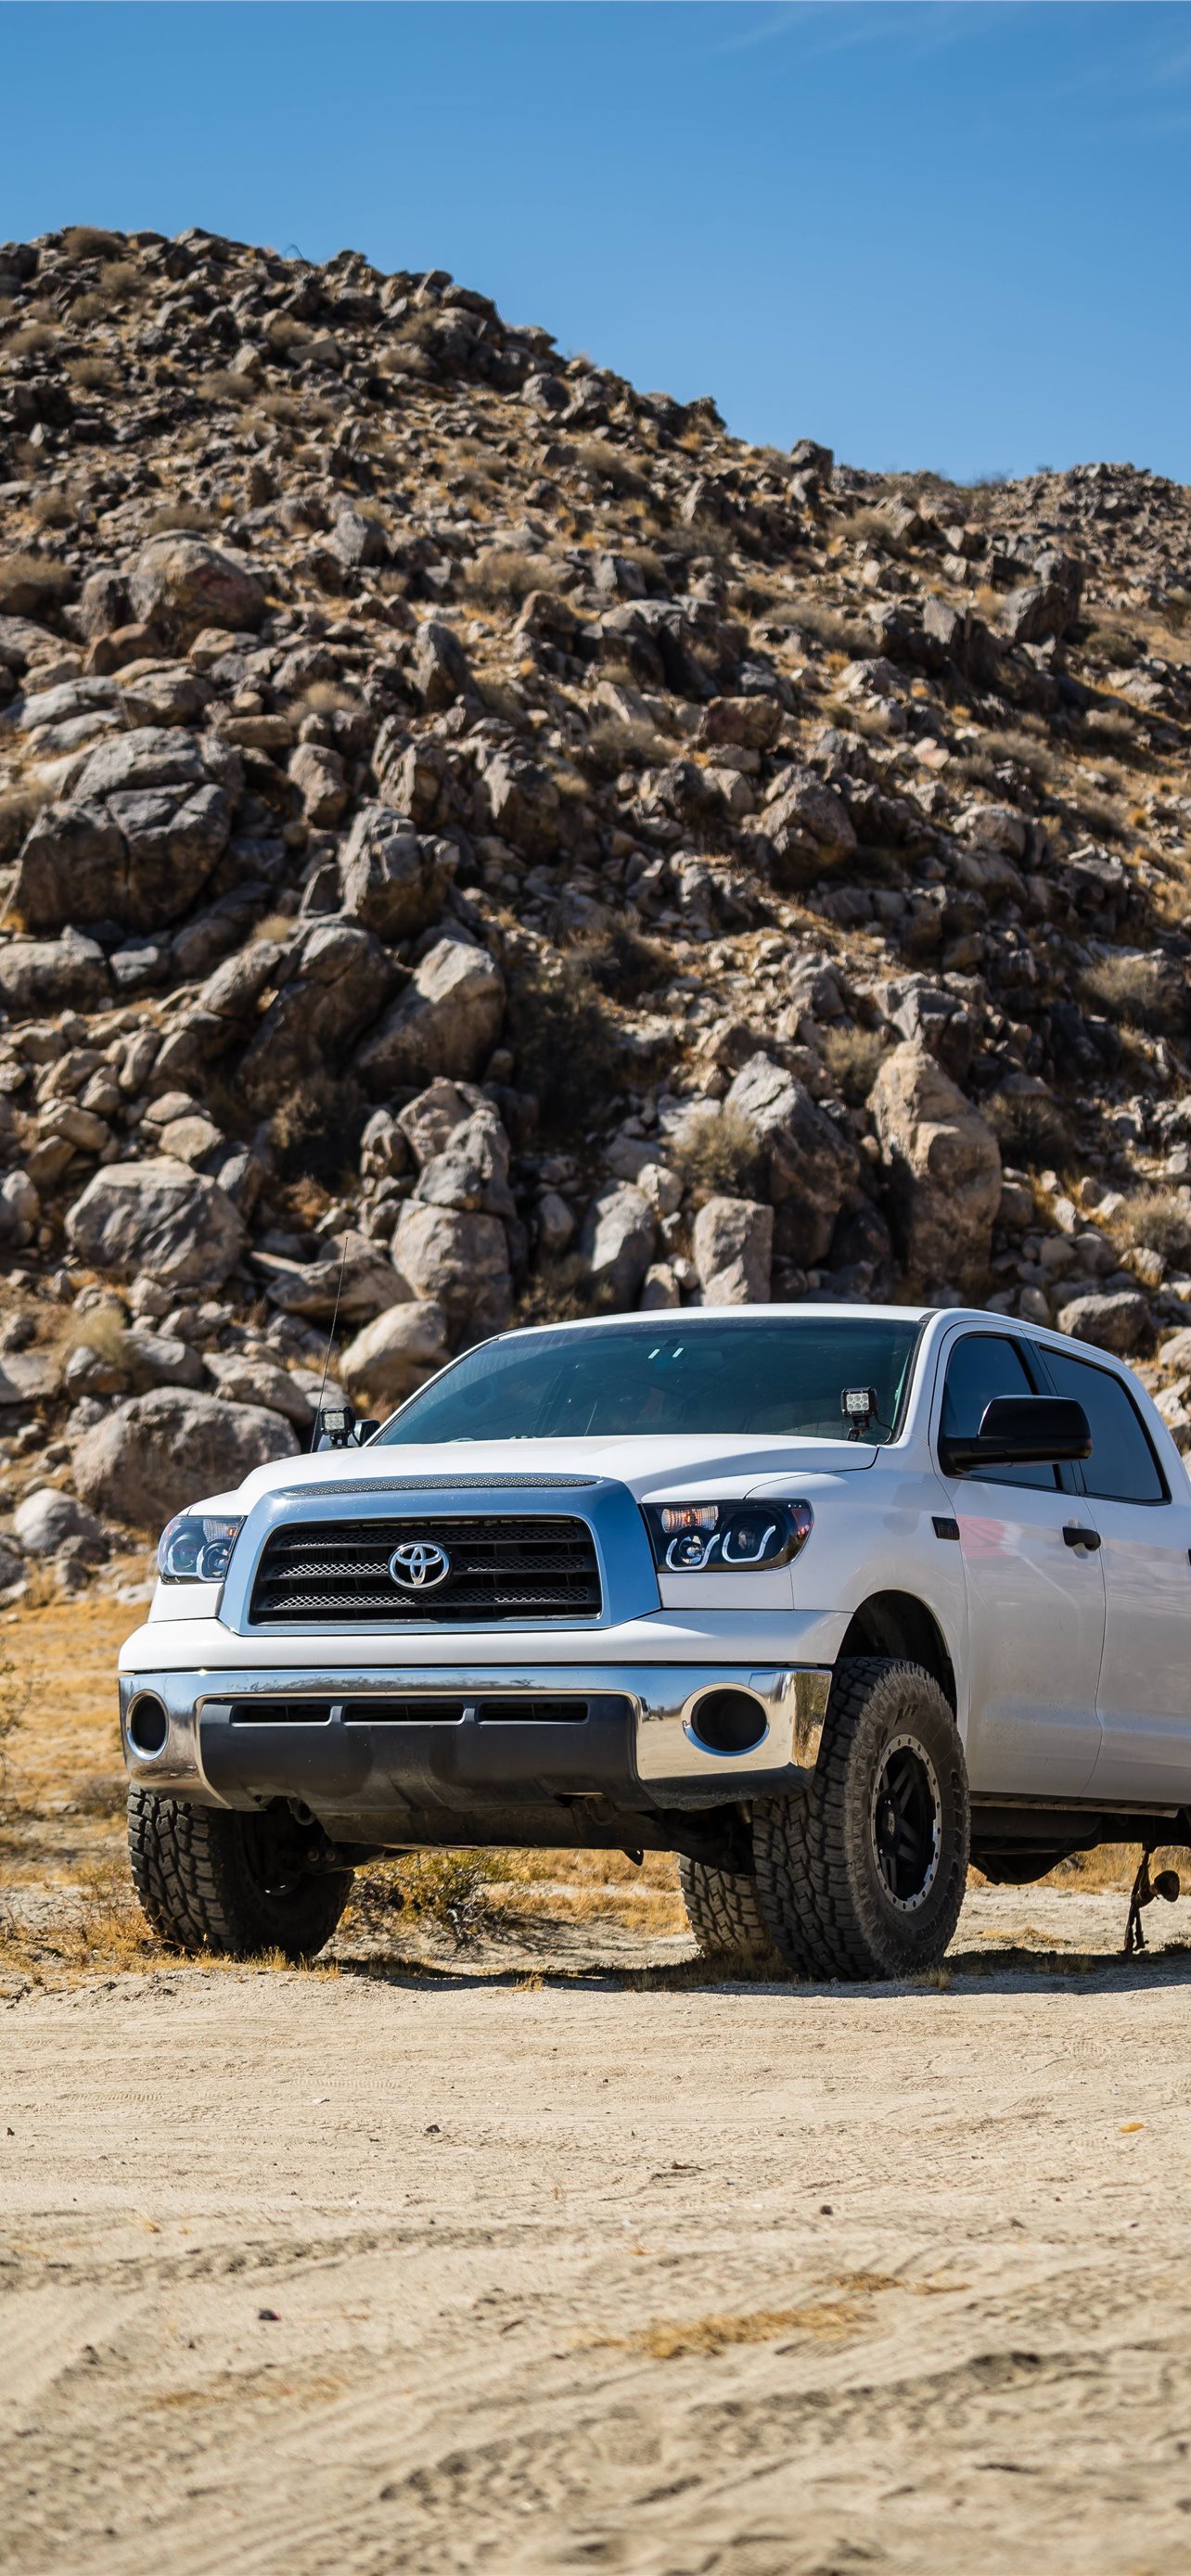 Toyota Tundra Iphone Wallpapers Free Download